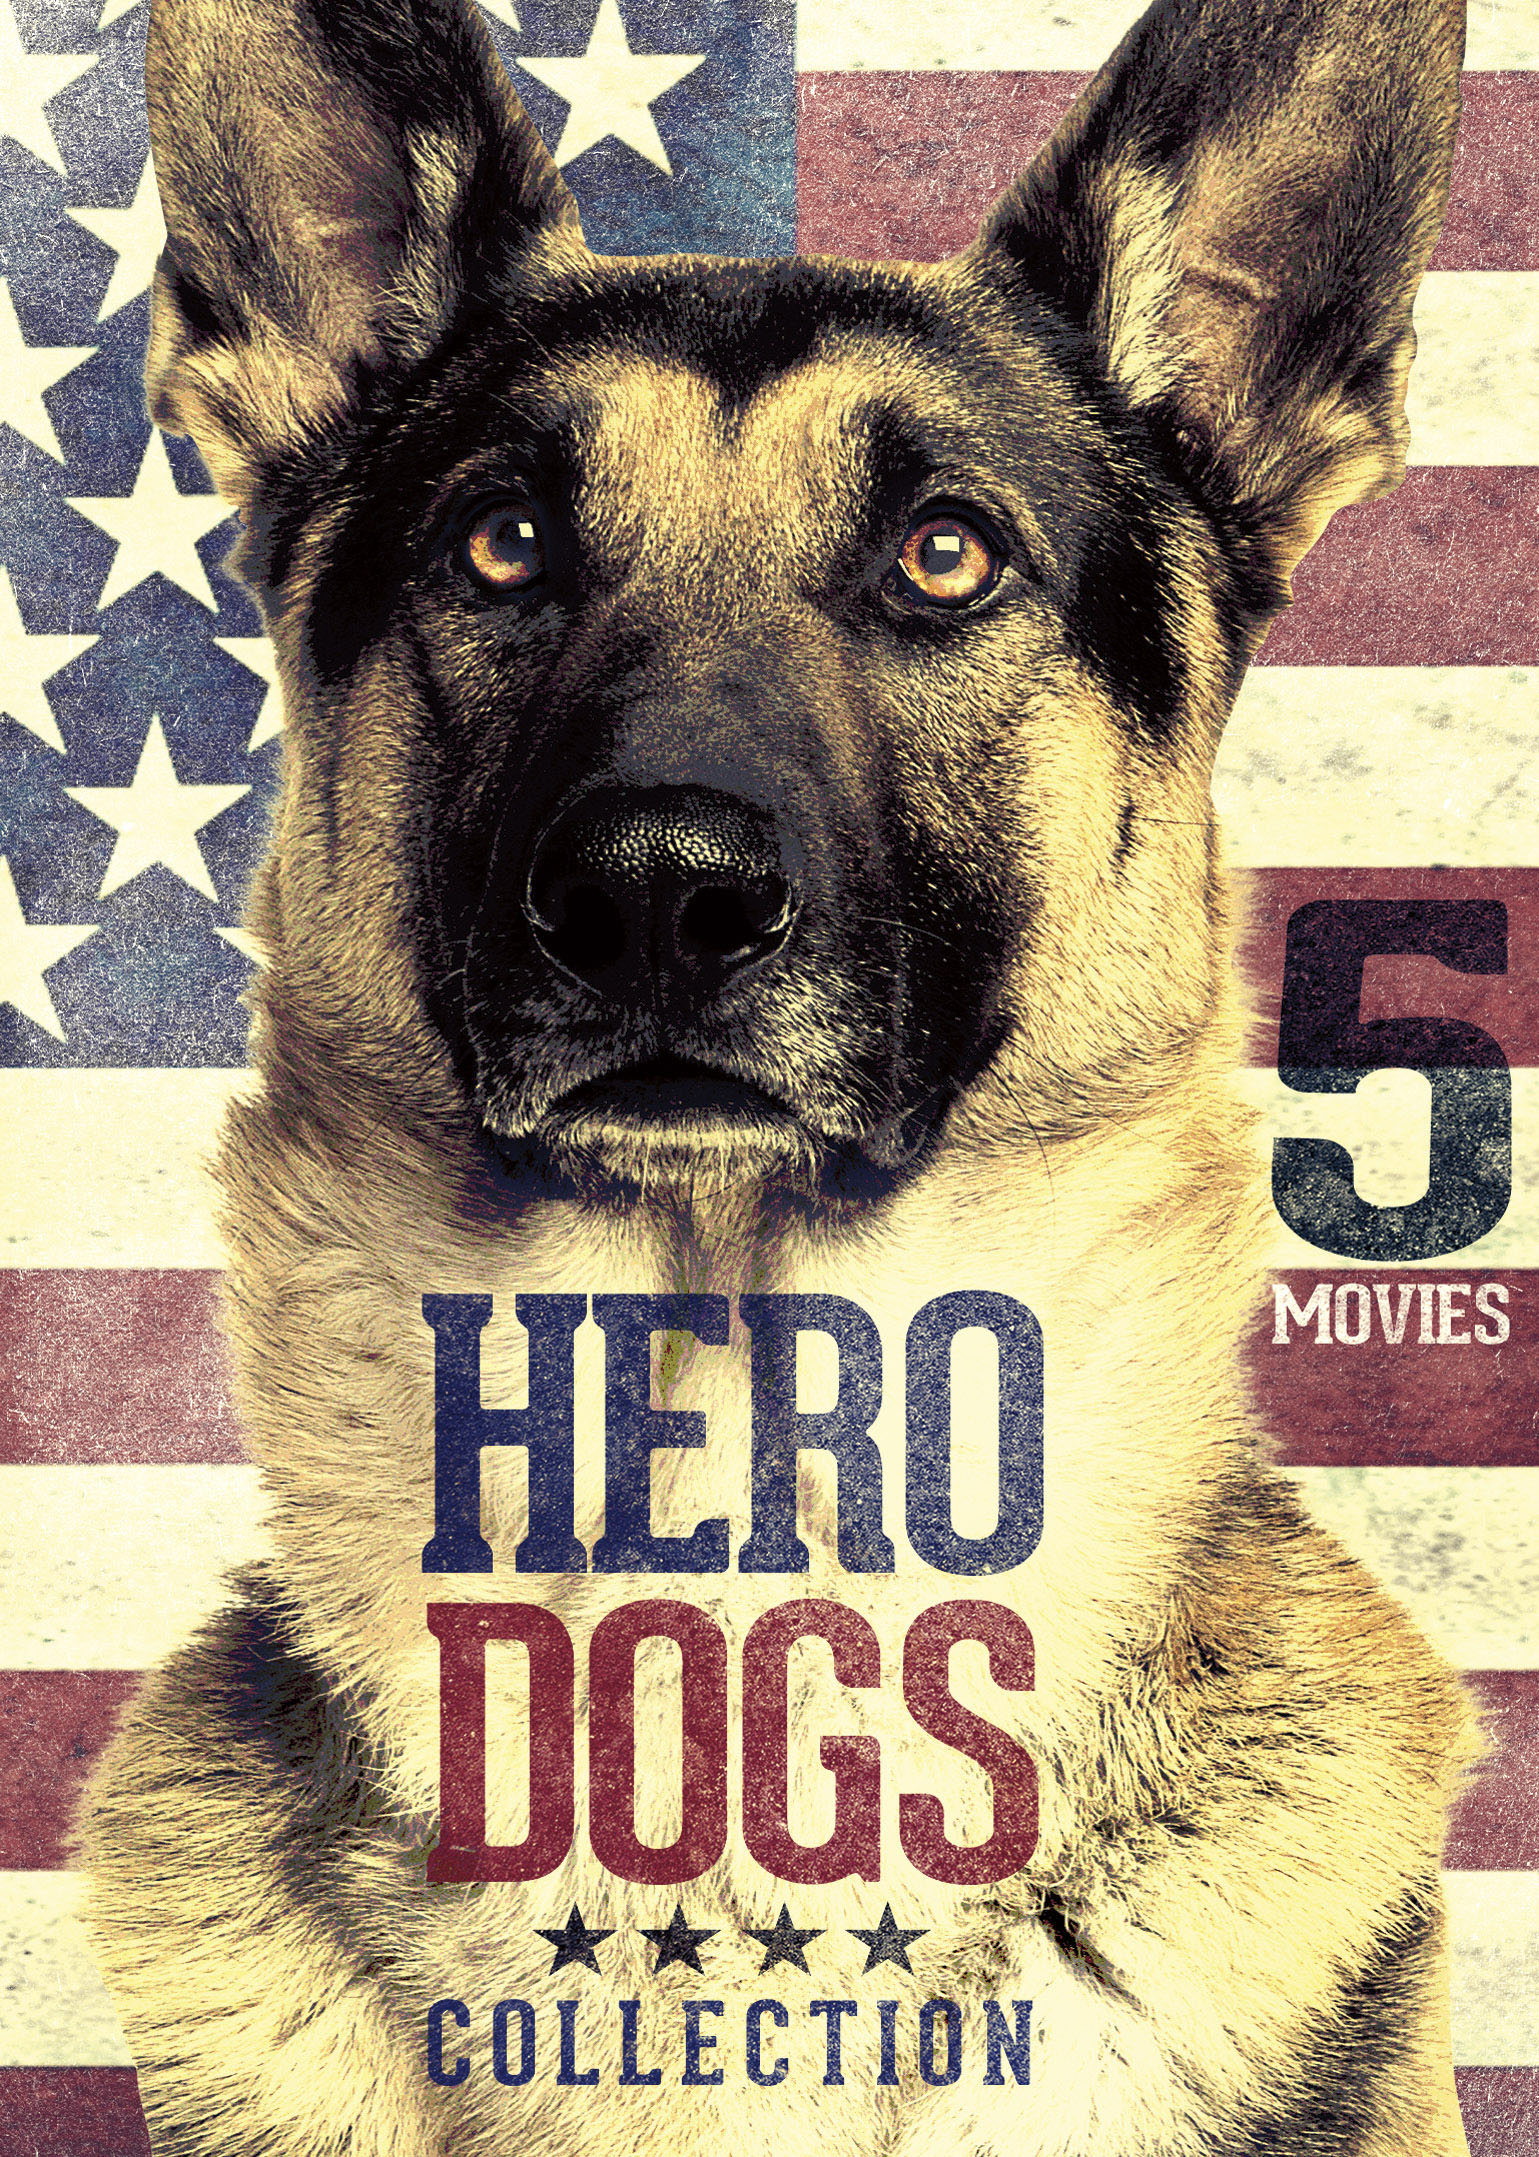 5-Movie Hero Dogs Collection [DVD] - Best Buy